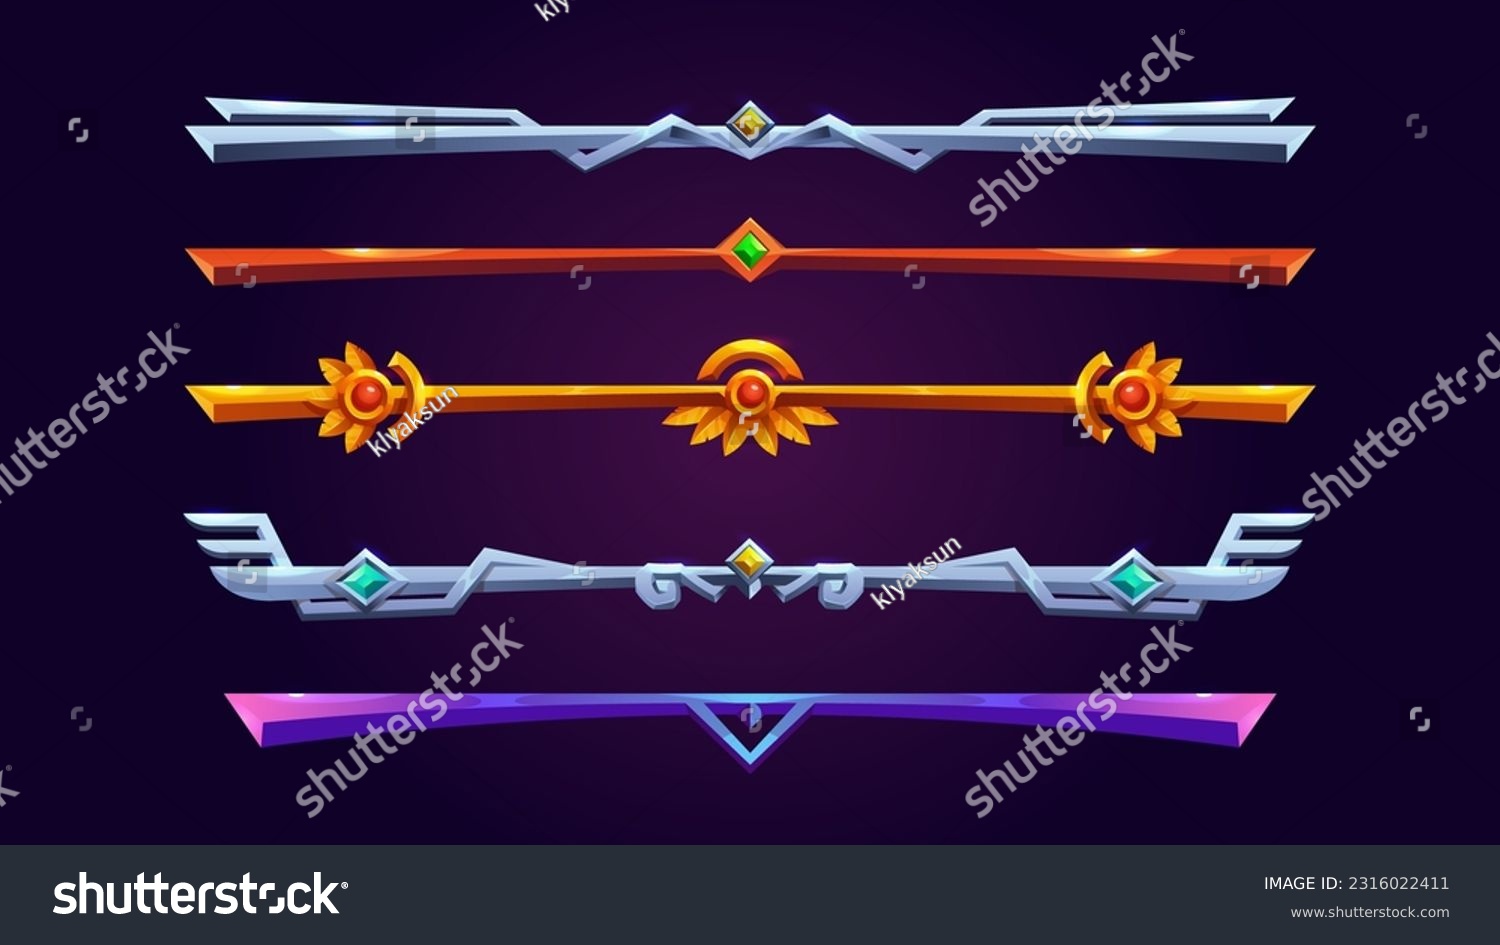 SVG of Cartoon set of decorative game dividers isolated on background. Vector illustration of medieval, royal and futuristic golden, silver, bronze, iron level items ornated with gemstones. UI design element svg